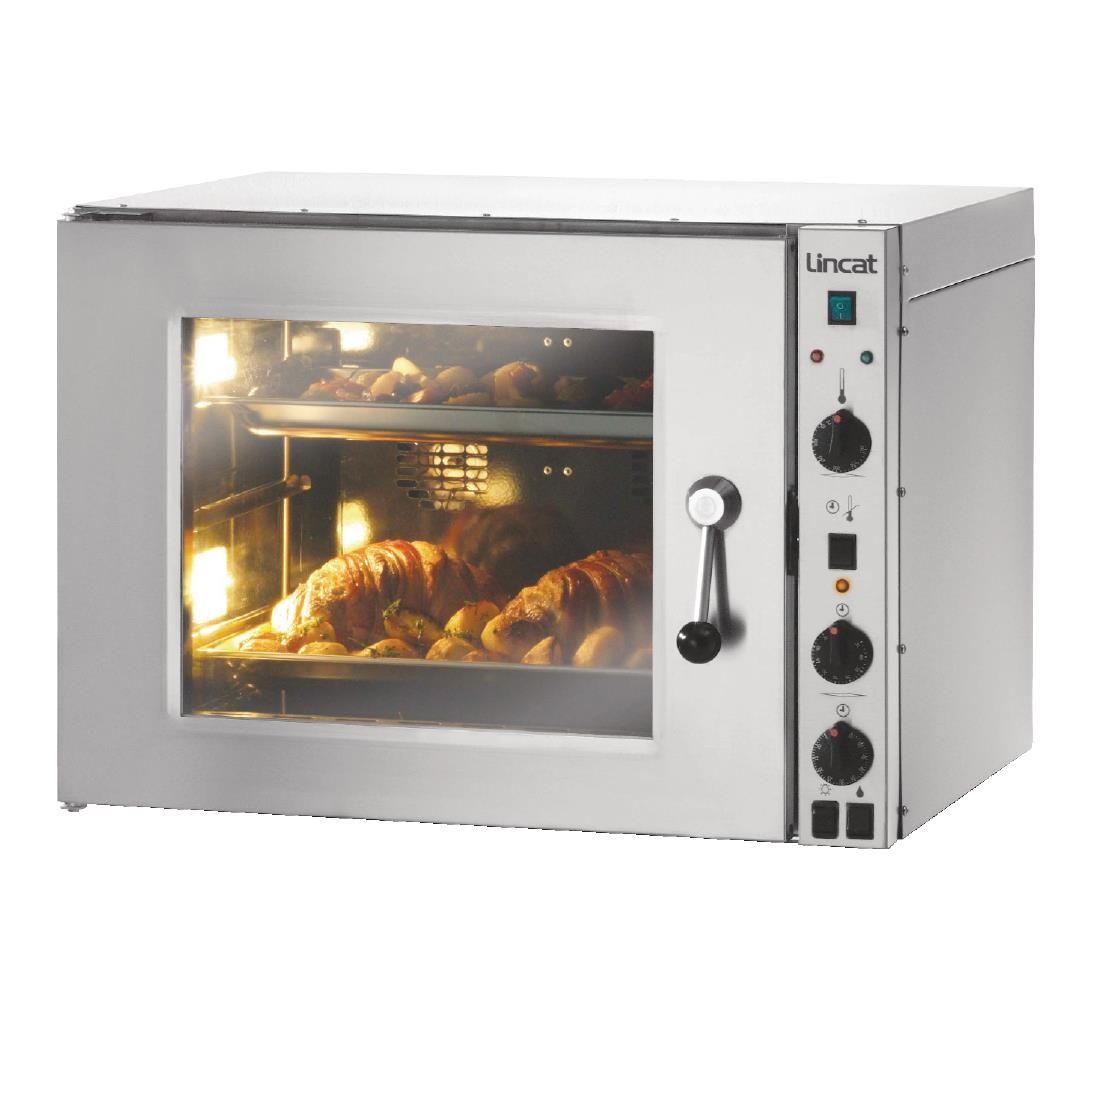 ECO8 - Lincat Electric Counter-top Convection Oven - W 787 mm - D 644 mm - 3.0 kW JD Catering Equipment Solutions Ltd